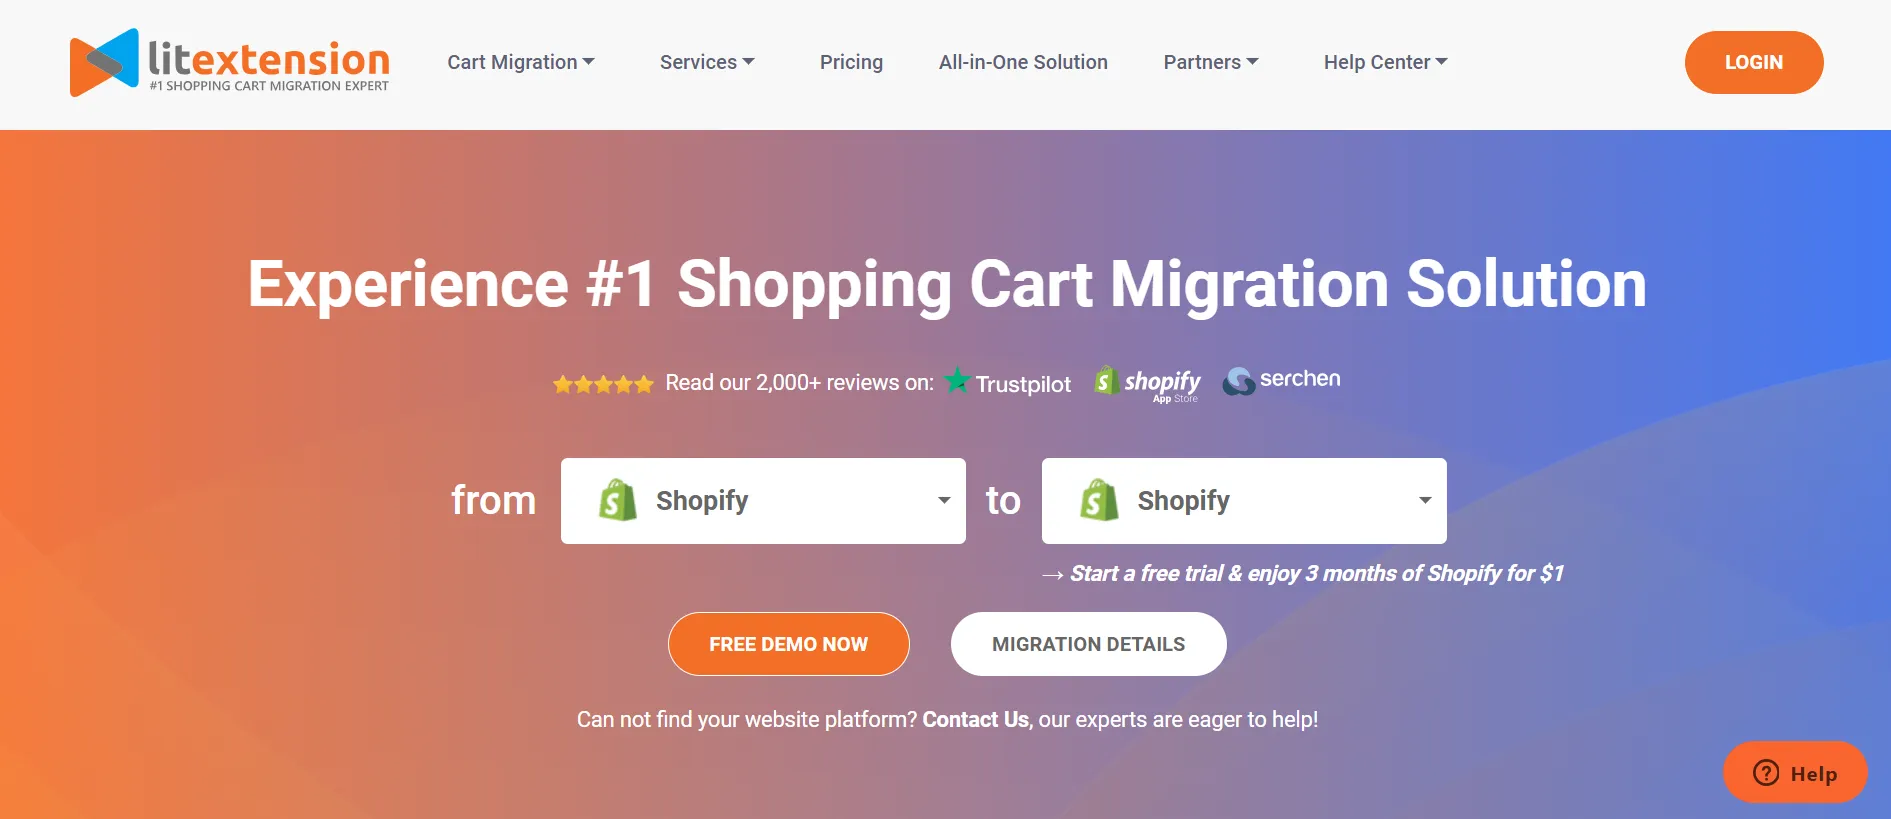 Shopify to Shopify migration with LitExtension